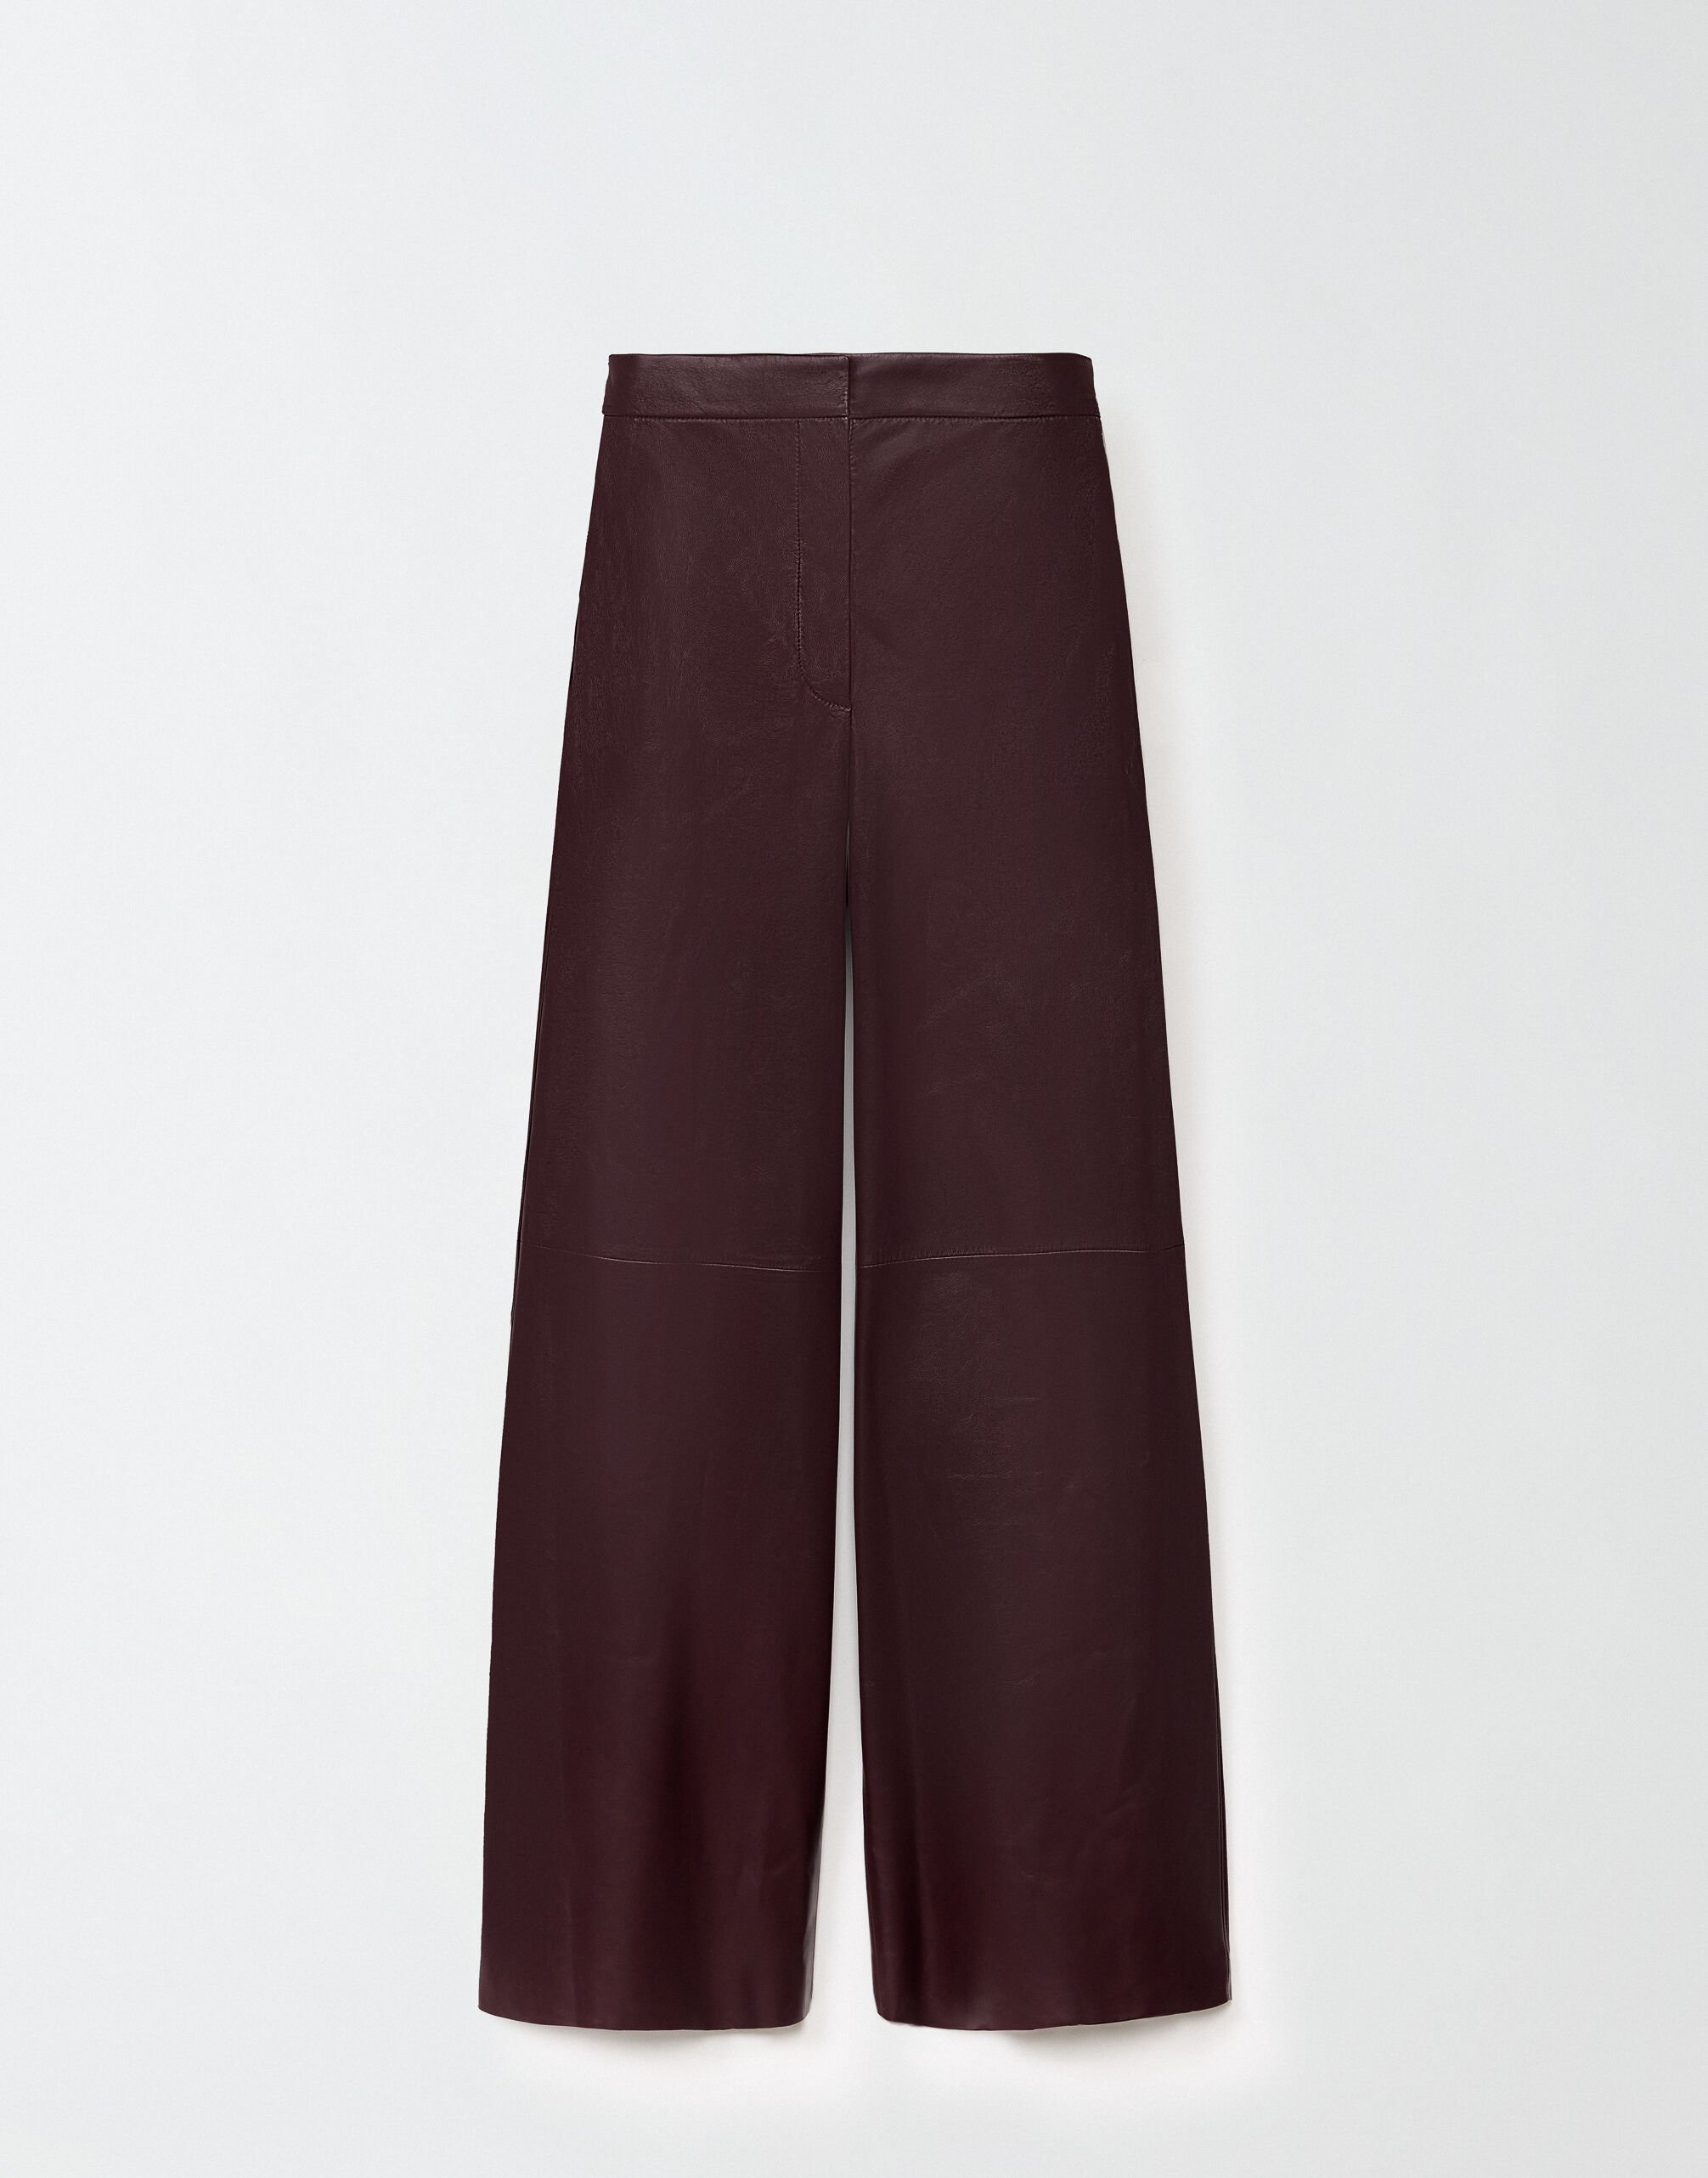 ${brand} Nappa leather trousers, burgundy ${colorDescription} ${masterID}